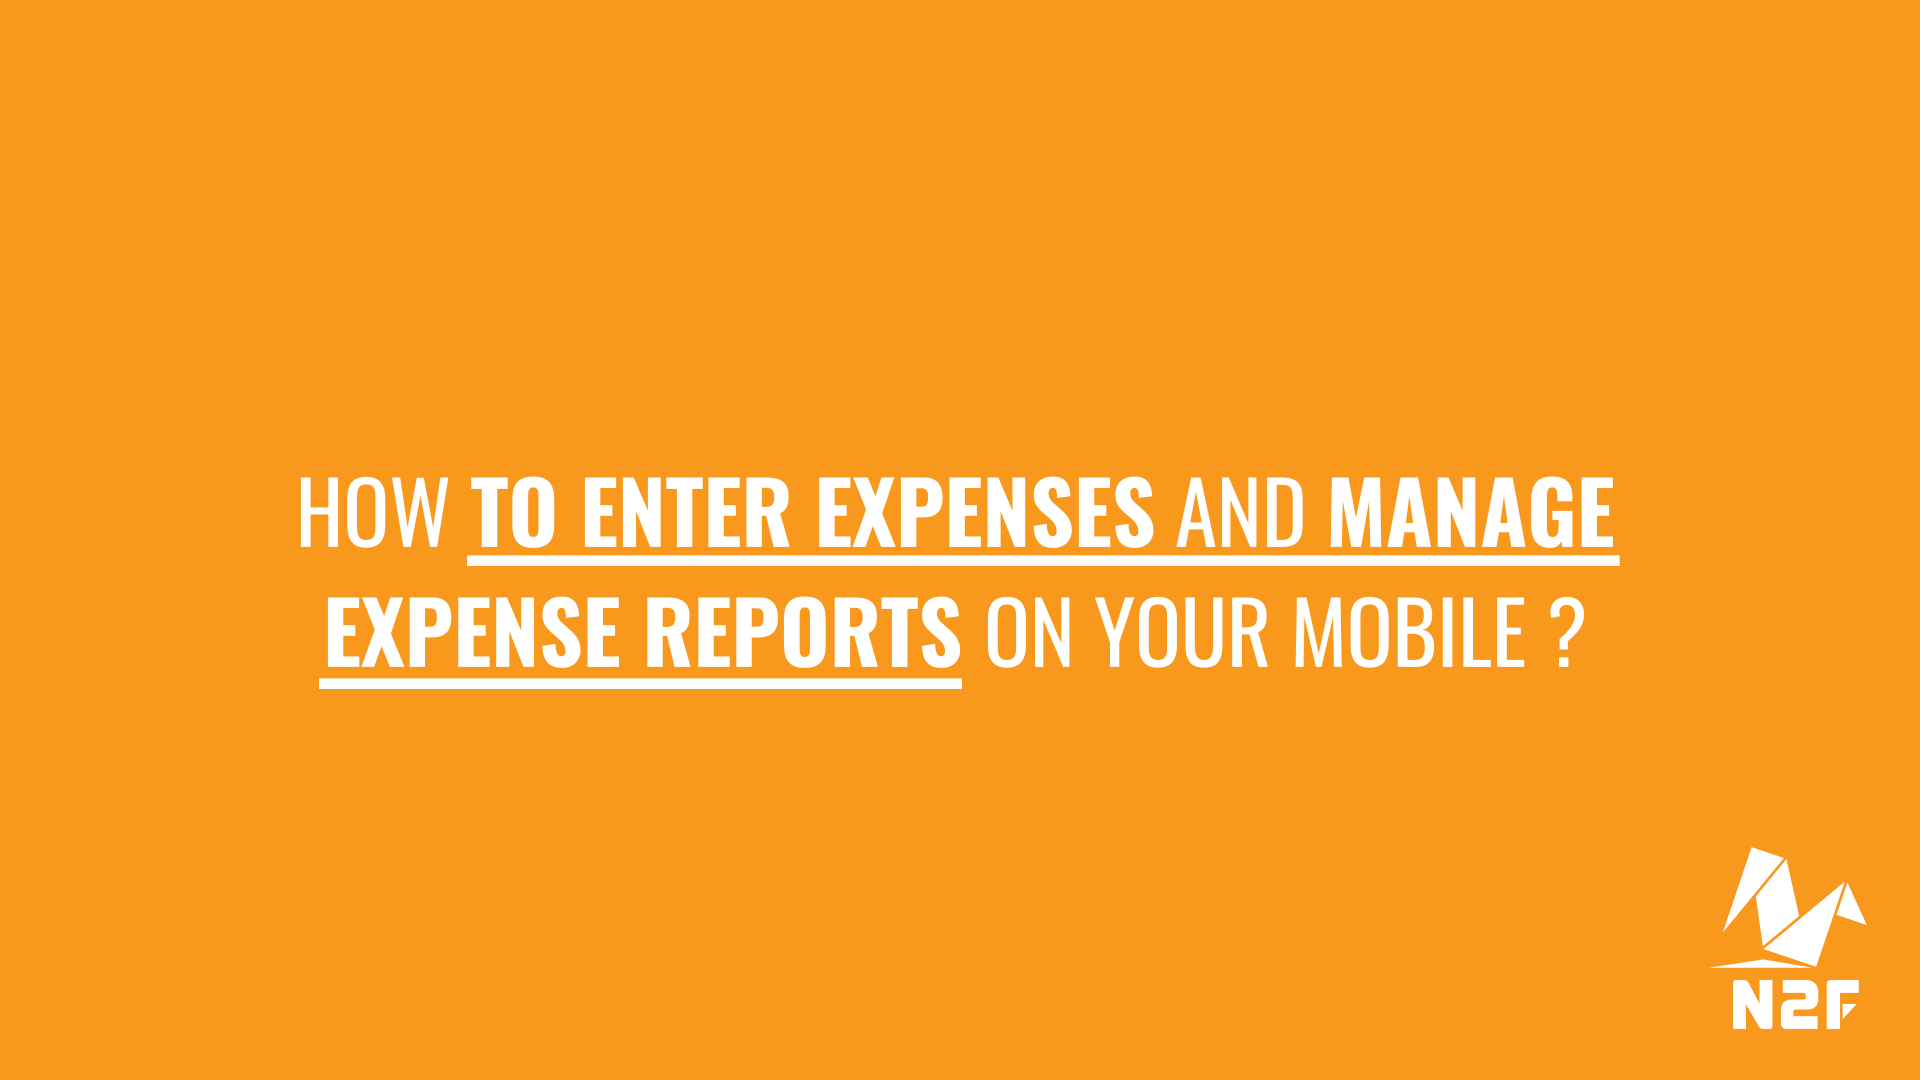 How to enter expenses and manage expenses reports on your mobile?